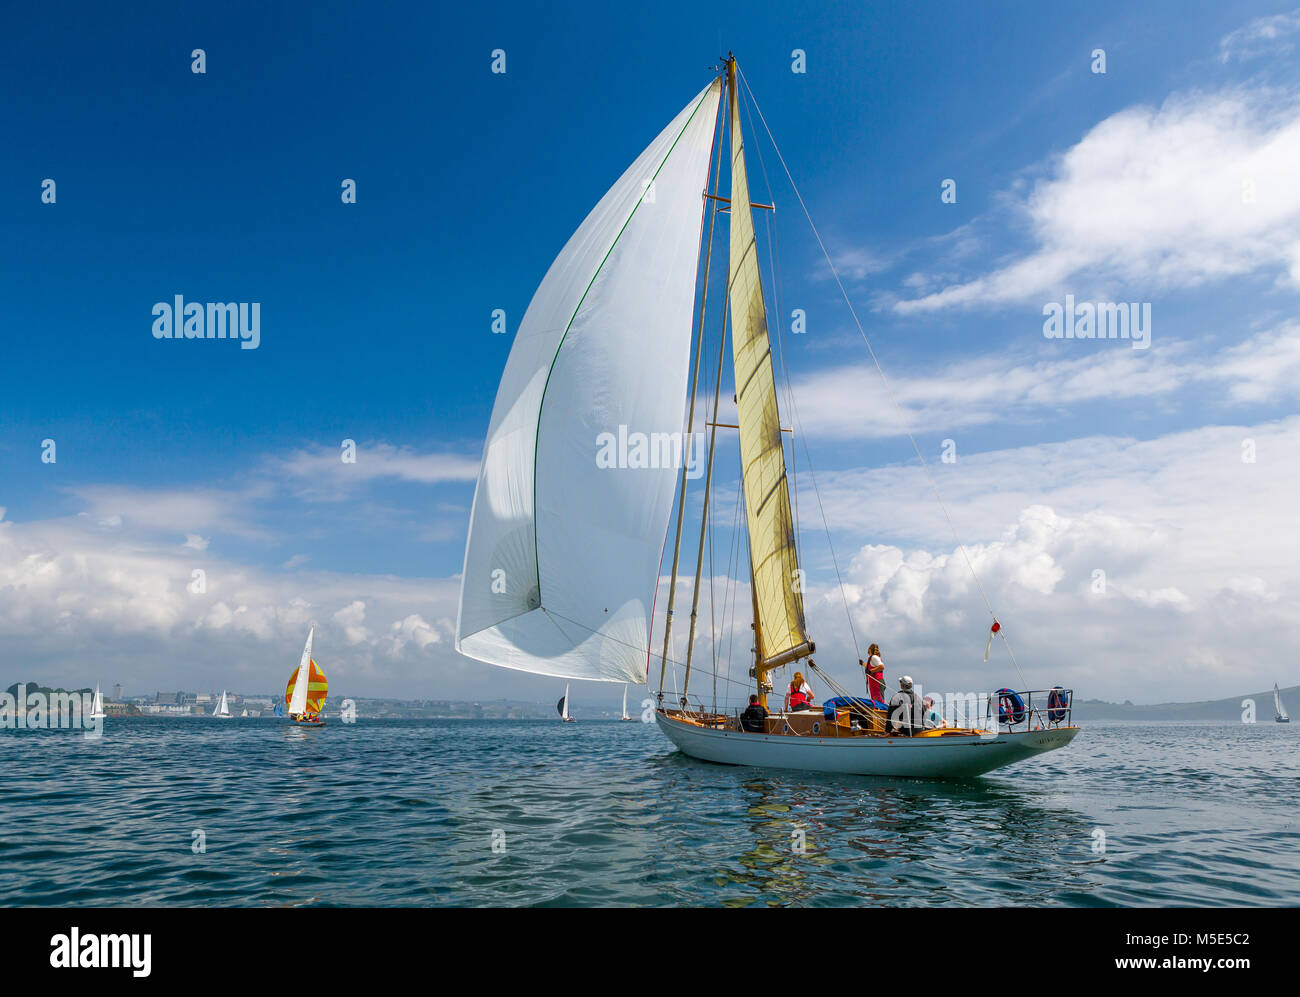 The classic wooden yacht Sibyl Of Cumae flying her gennaker sail. Stock Photo